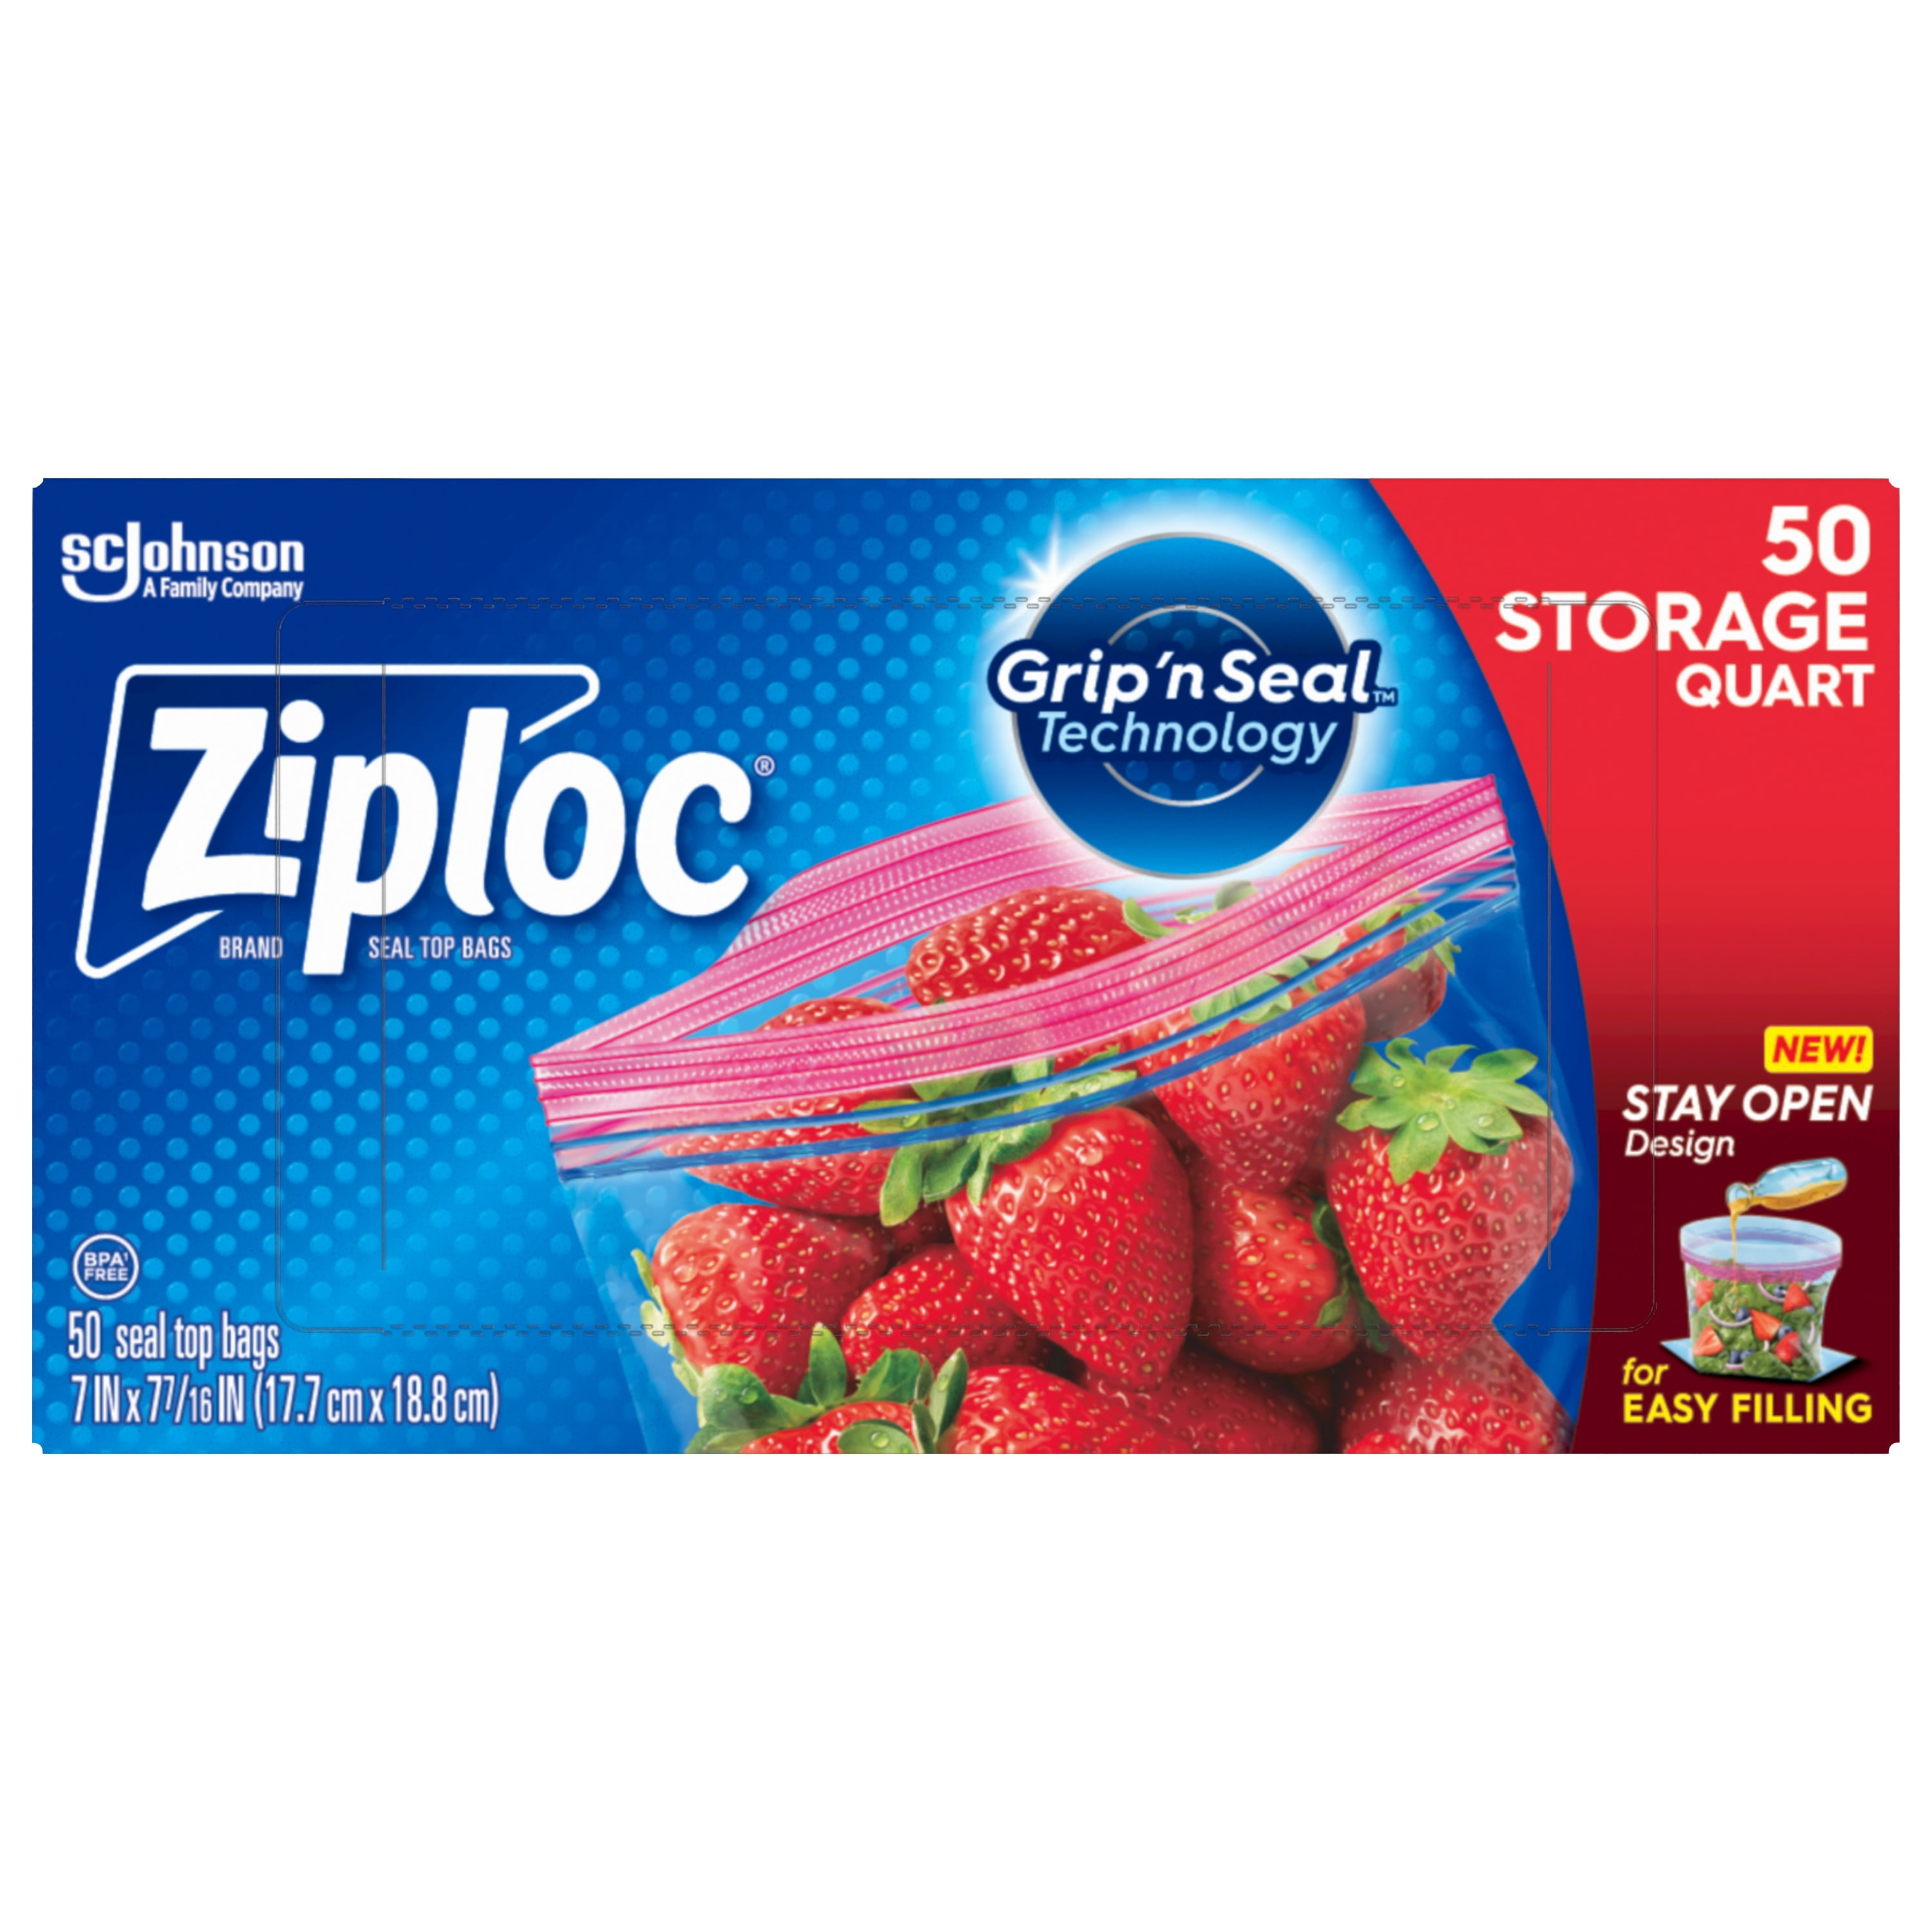 Ziploc Brand Storage Bags with New Stay Open Design, Gallon, 19 Count,  Patented Stand-up Bottom, Easy to Fill Food Storage Bags, Unloc a Free Set  of